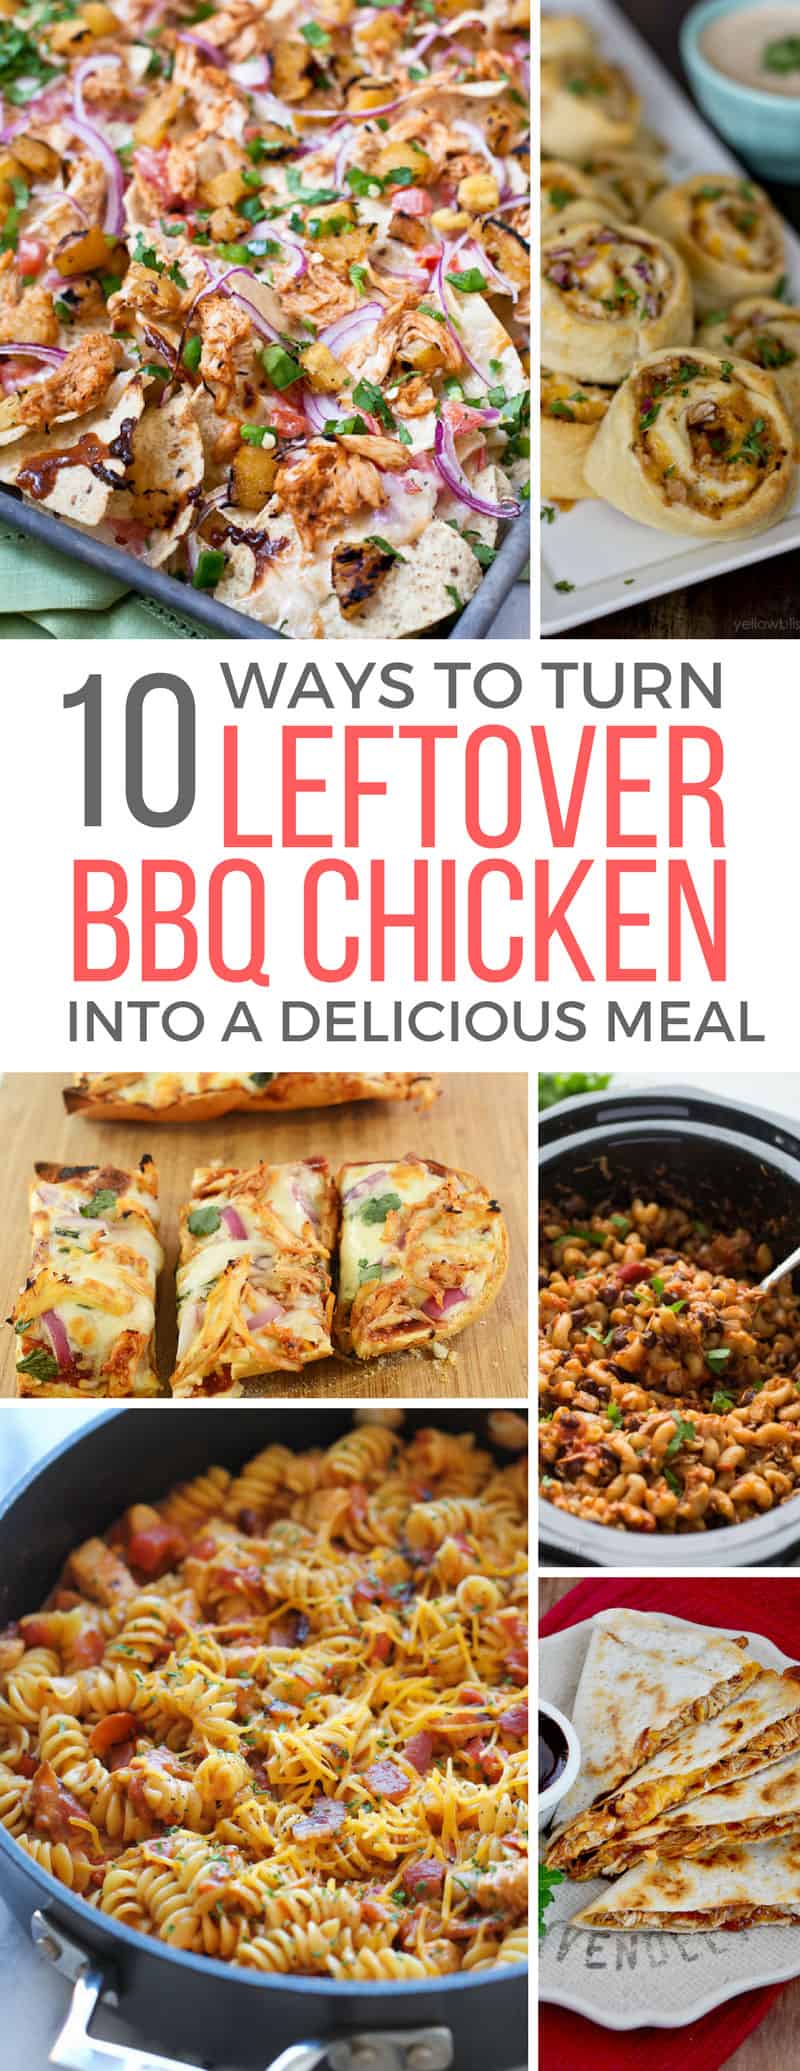 These recipes taste great and are the perfect way to use up that leftover BBQ chicken!